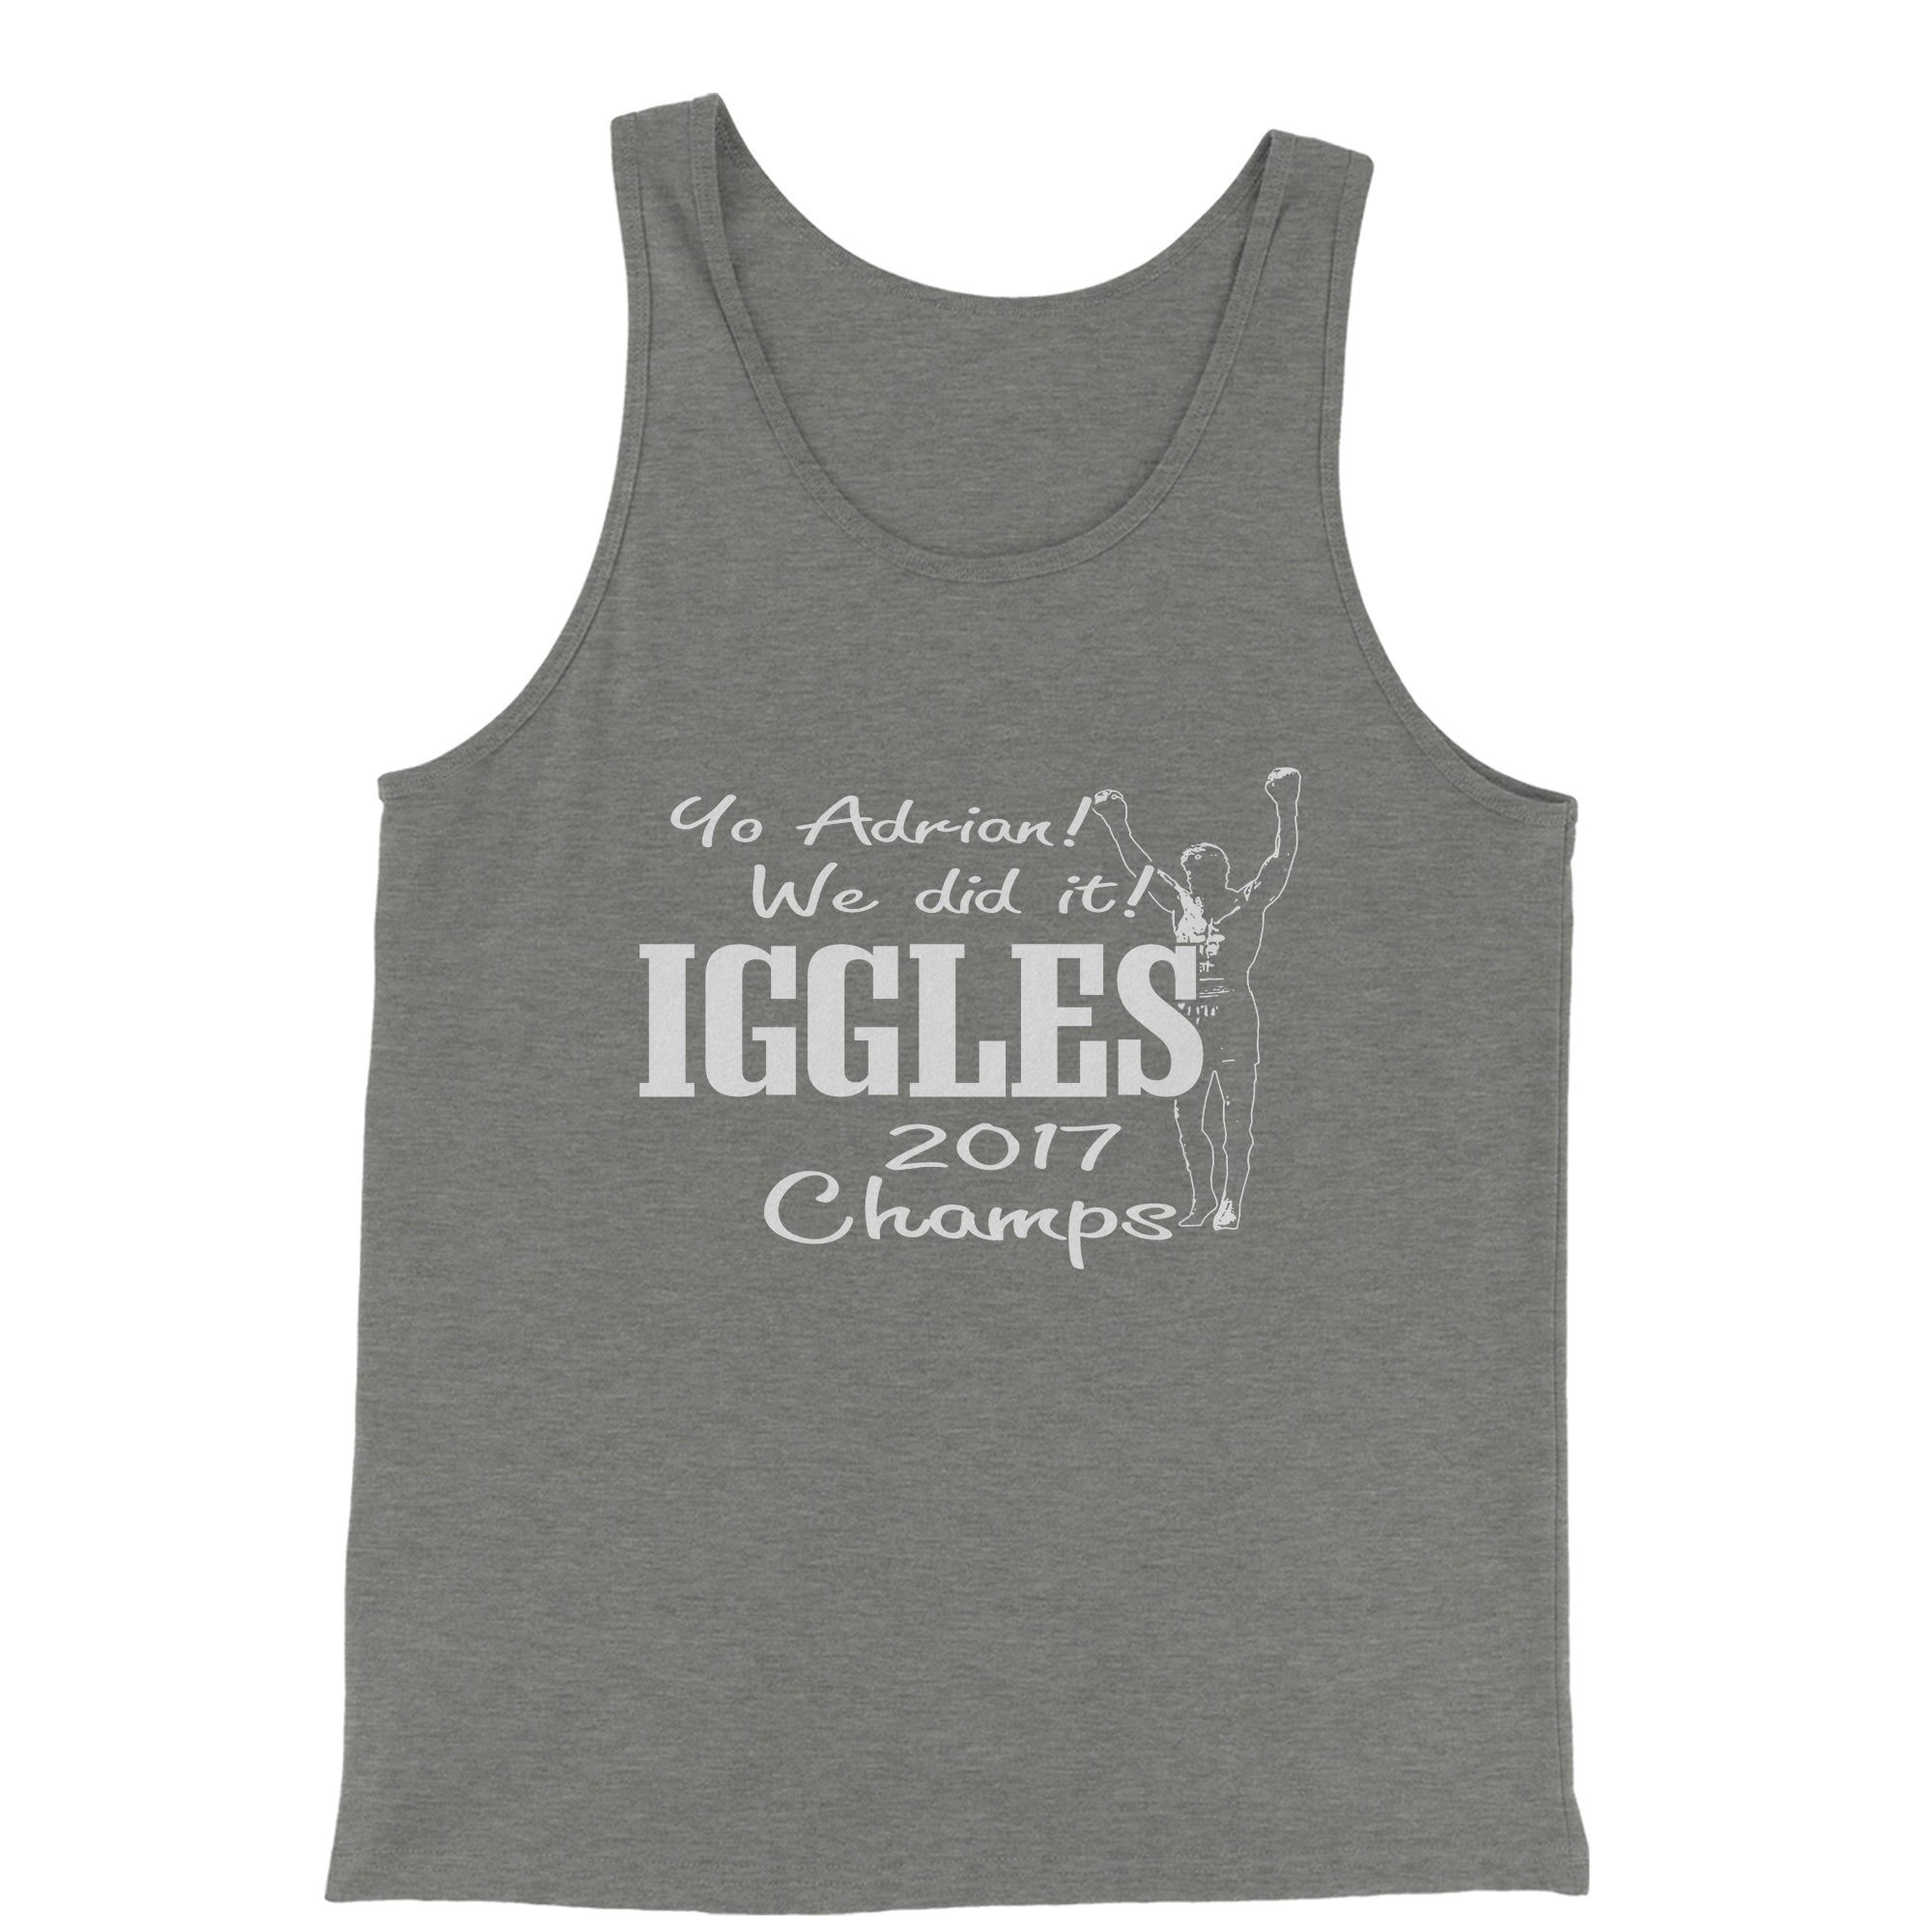 Philly Iggles Football Champs 2017 Men's Jersey Tank